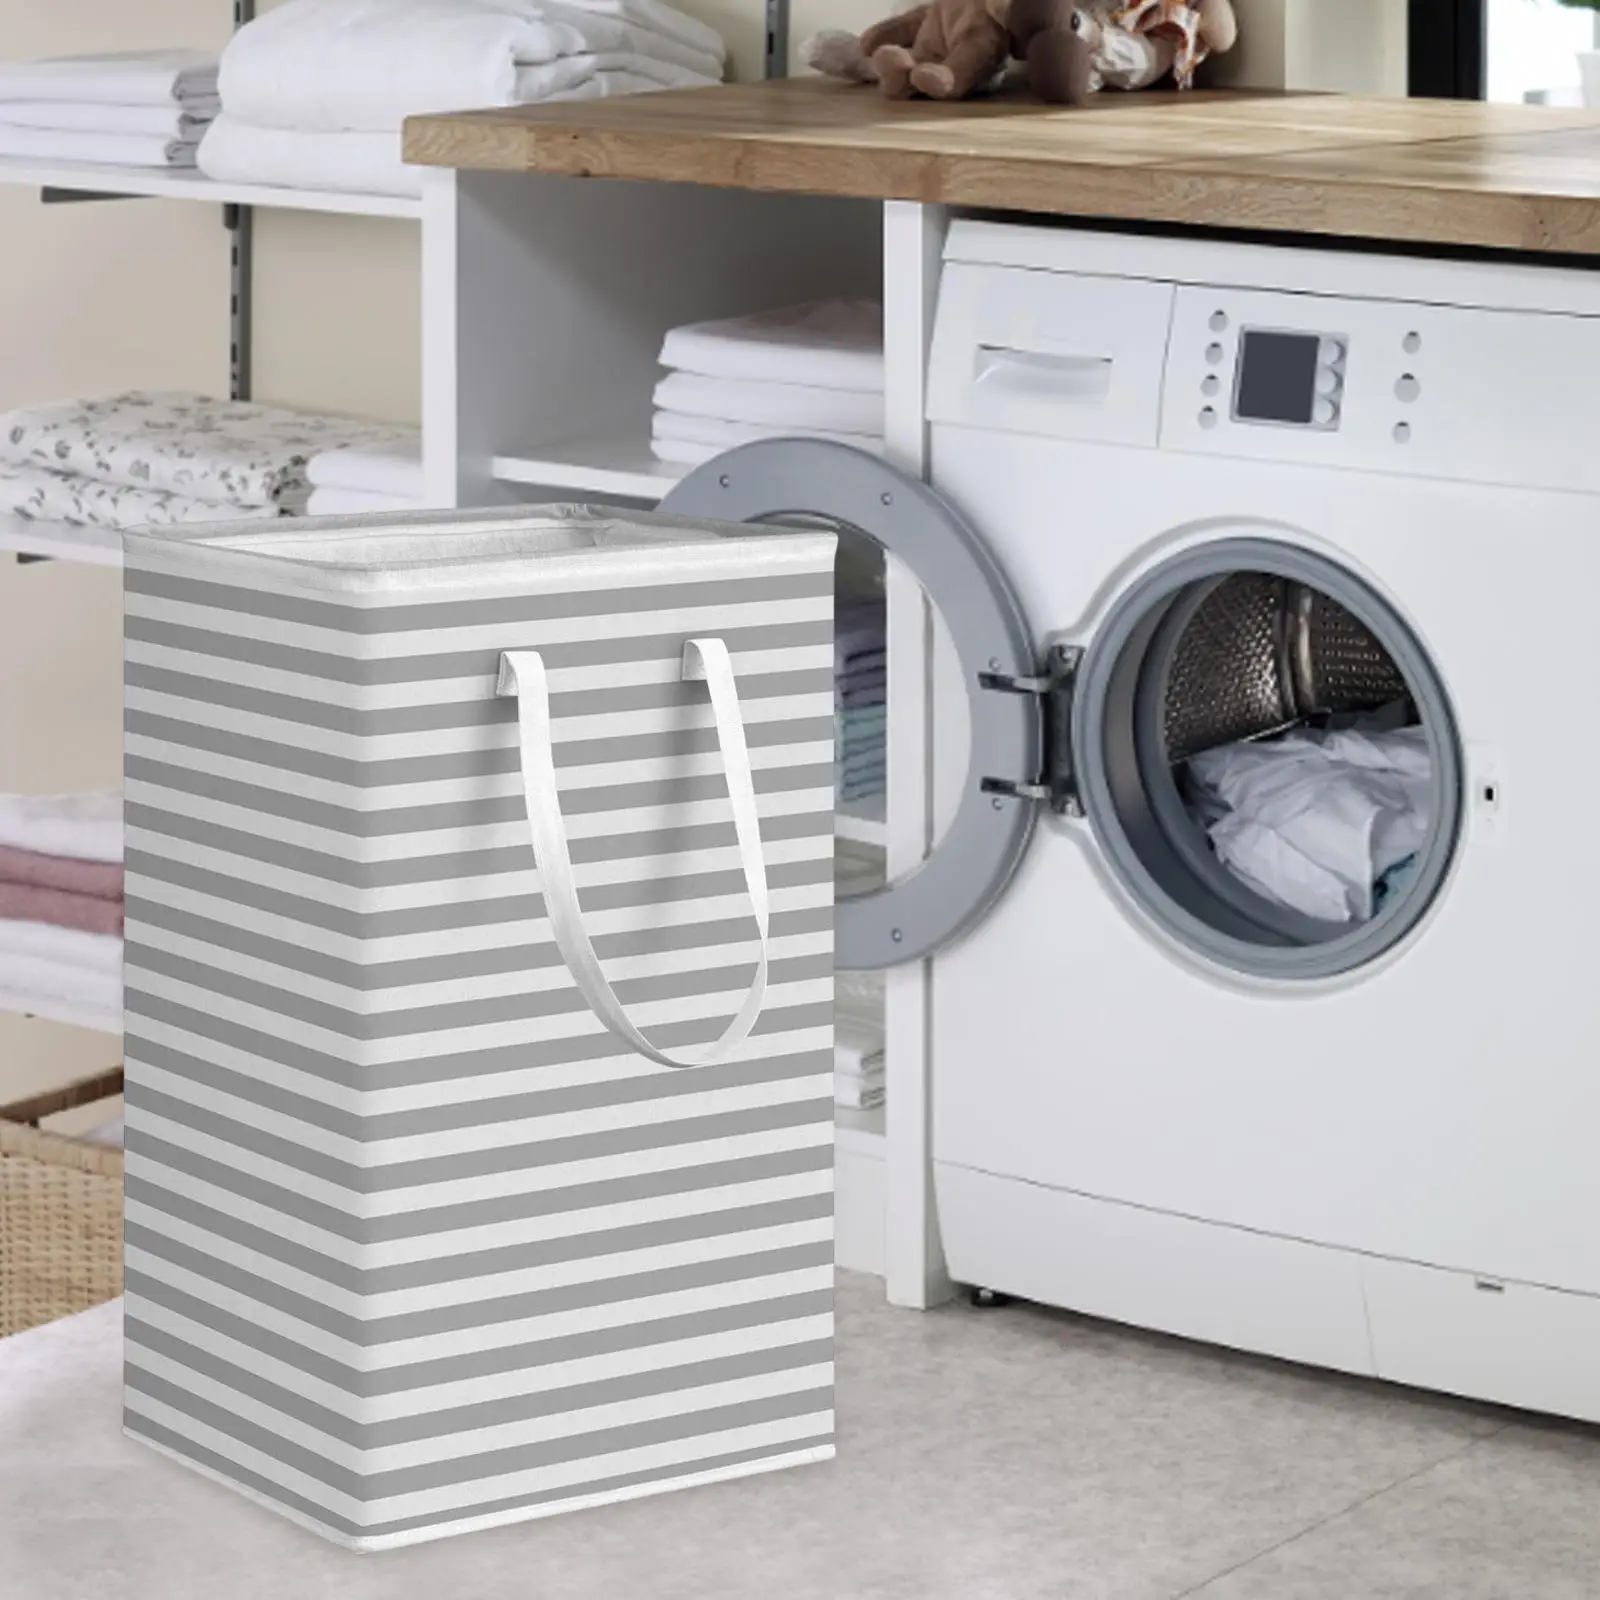 Free Standing Laundry Hamper with Convenient Carrying Handles Toy Garment